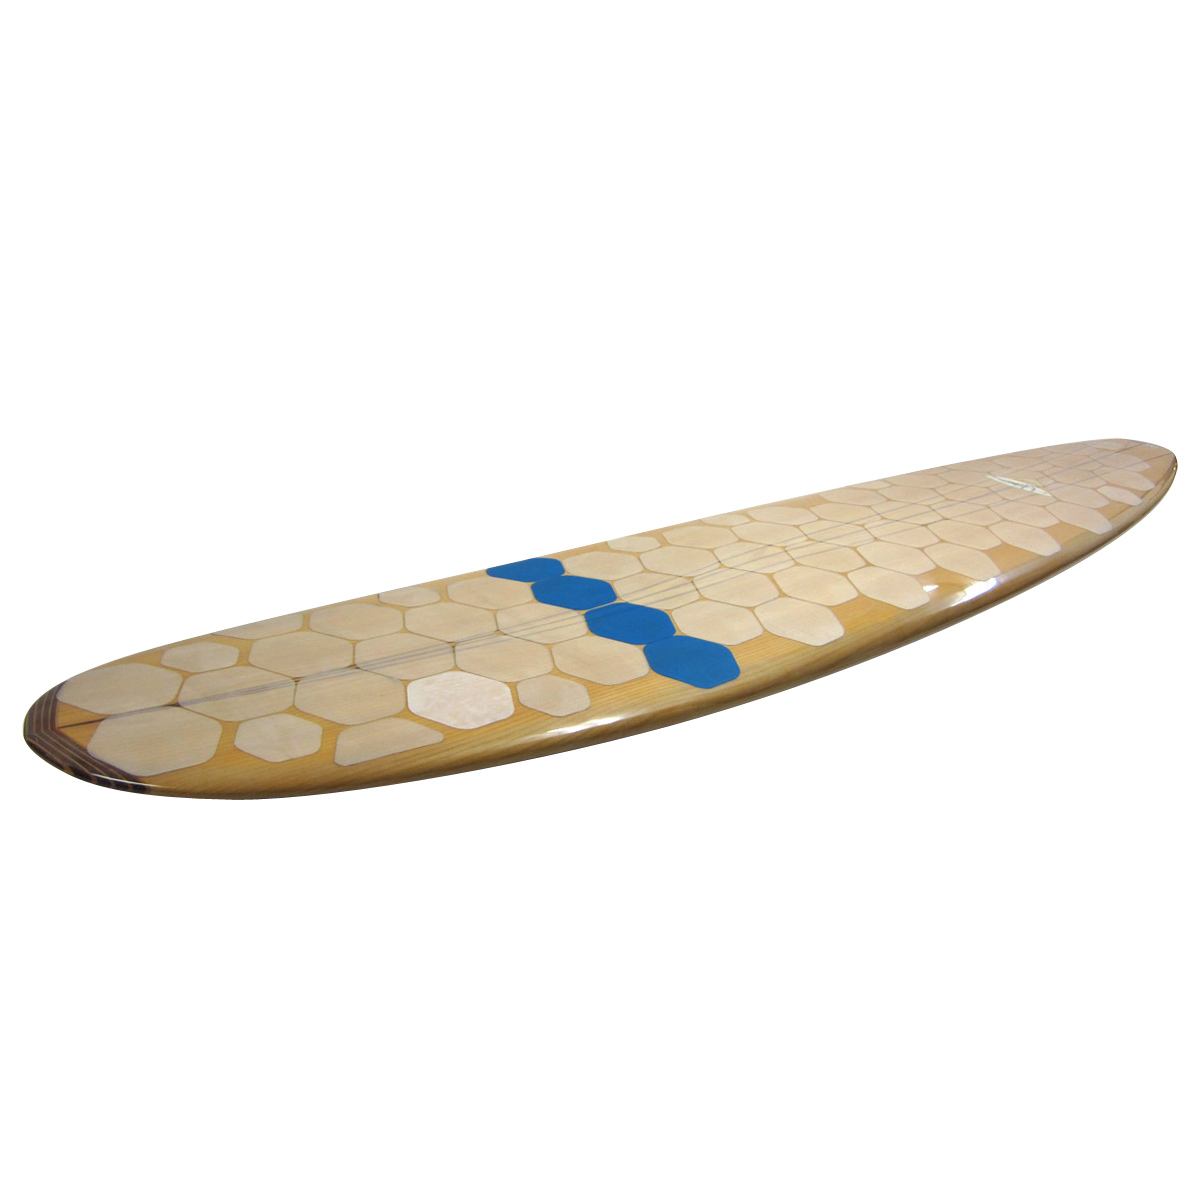 YATER / 9`0 Spoon Woody Surftech